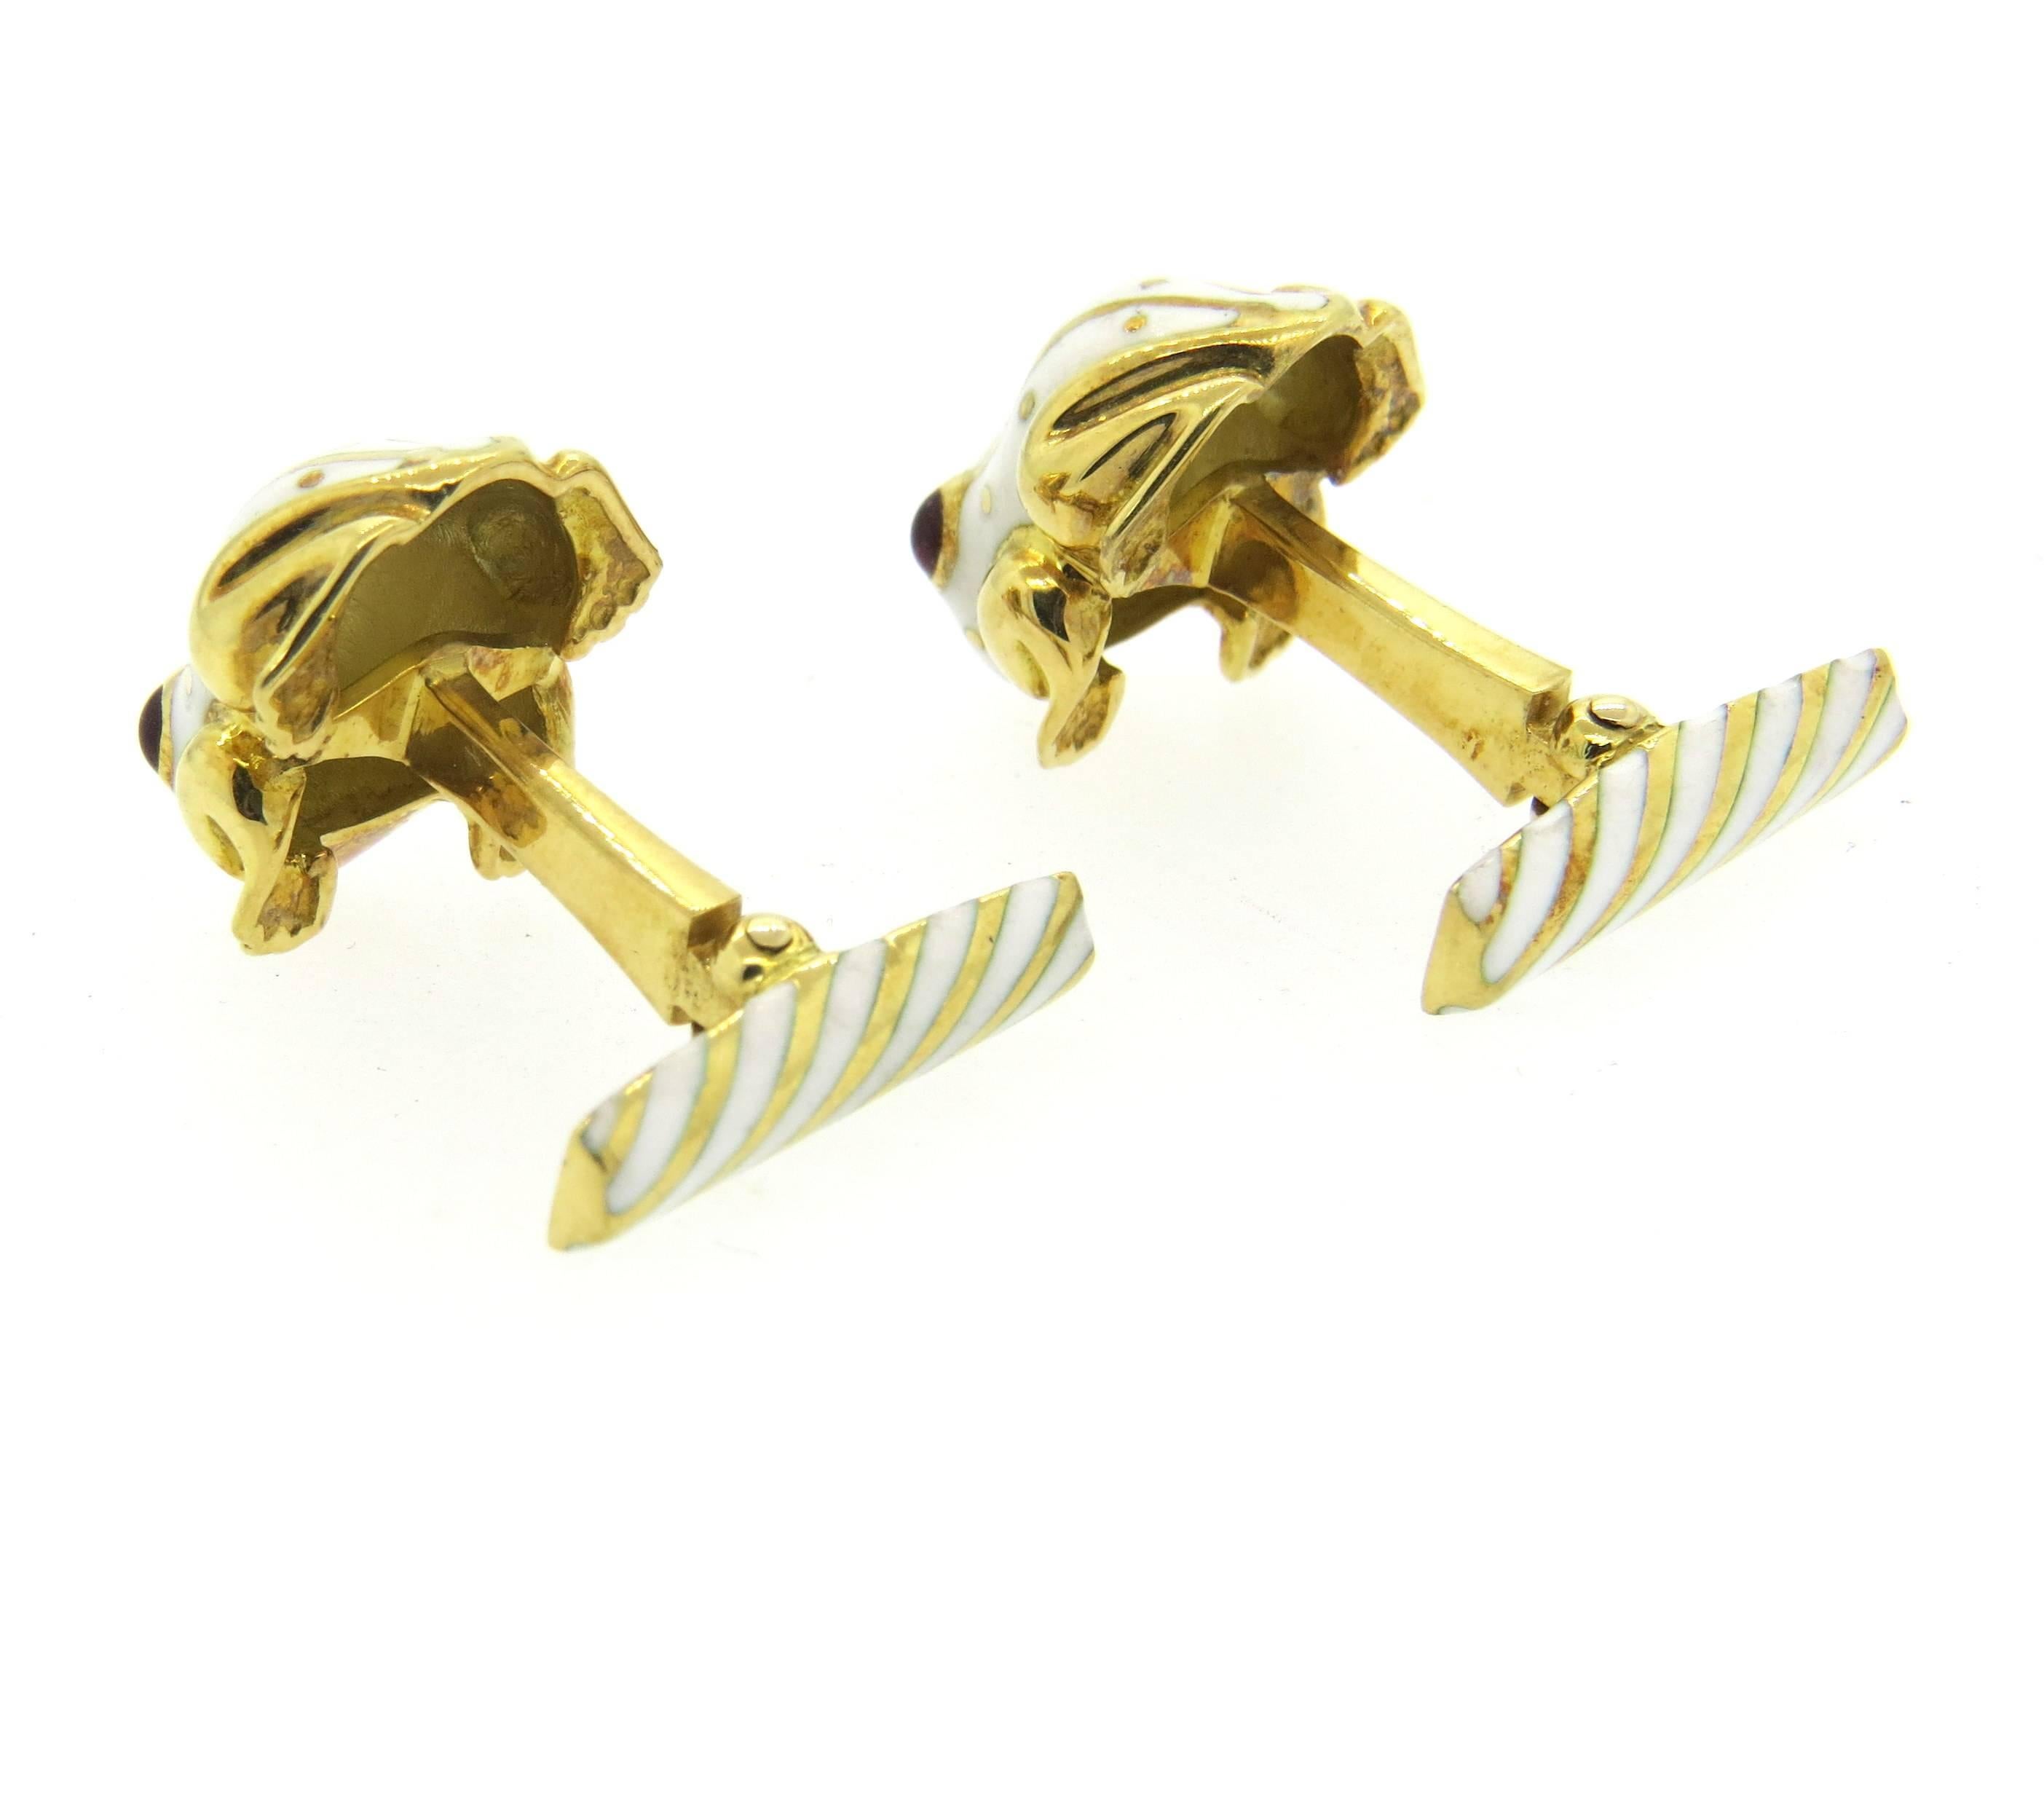 Pair of iconic 18k yellow gold cufflinks, crafted by David Webb, decorated with white enamel and ruby cabochon eyes, depicting frogs. Cufflink top measures 18mm x 14mm. Marked Webb 18k. Weight - 17.6 grams 